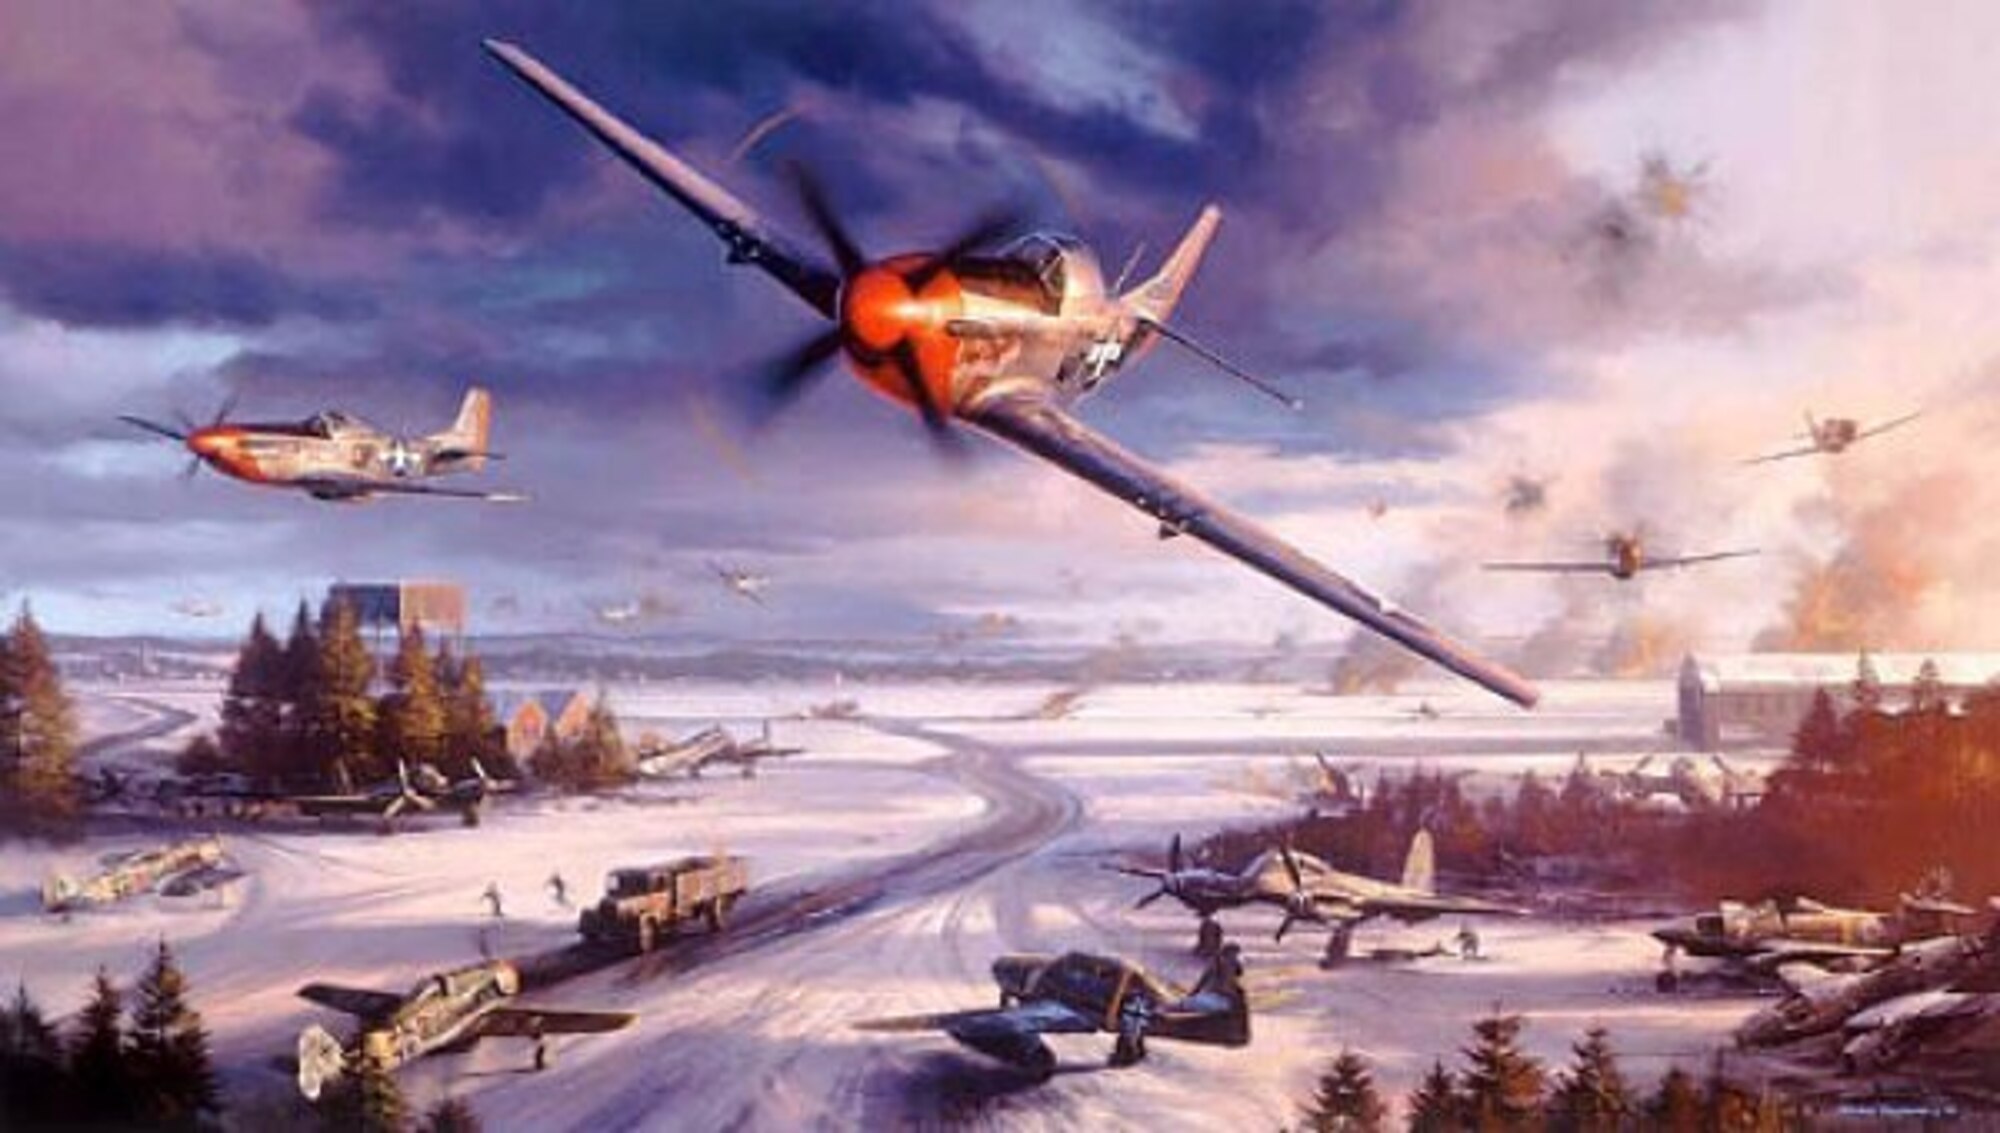 This painting titled “Mustang Mayhem” by Nicolas Trudgian depicts aircrew members from the 4th Fighter Group in action after 8th AF leadership dispatched 1,252 bombers and 913 fighters to find and destroy the Luftwaffe, April 16, 1945. By day’s end the Airmen had destroyed 752 German aircraft, almost all on the ground in strafing attacks. Crews from the 4th FG took out 105 of these destroyed enemy aircraft. (Painting by Nicolas Trudgian)